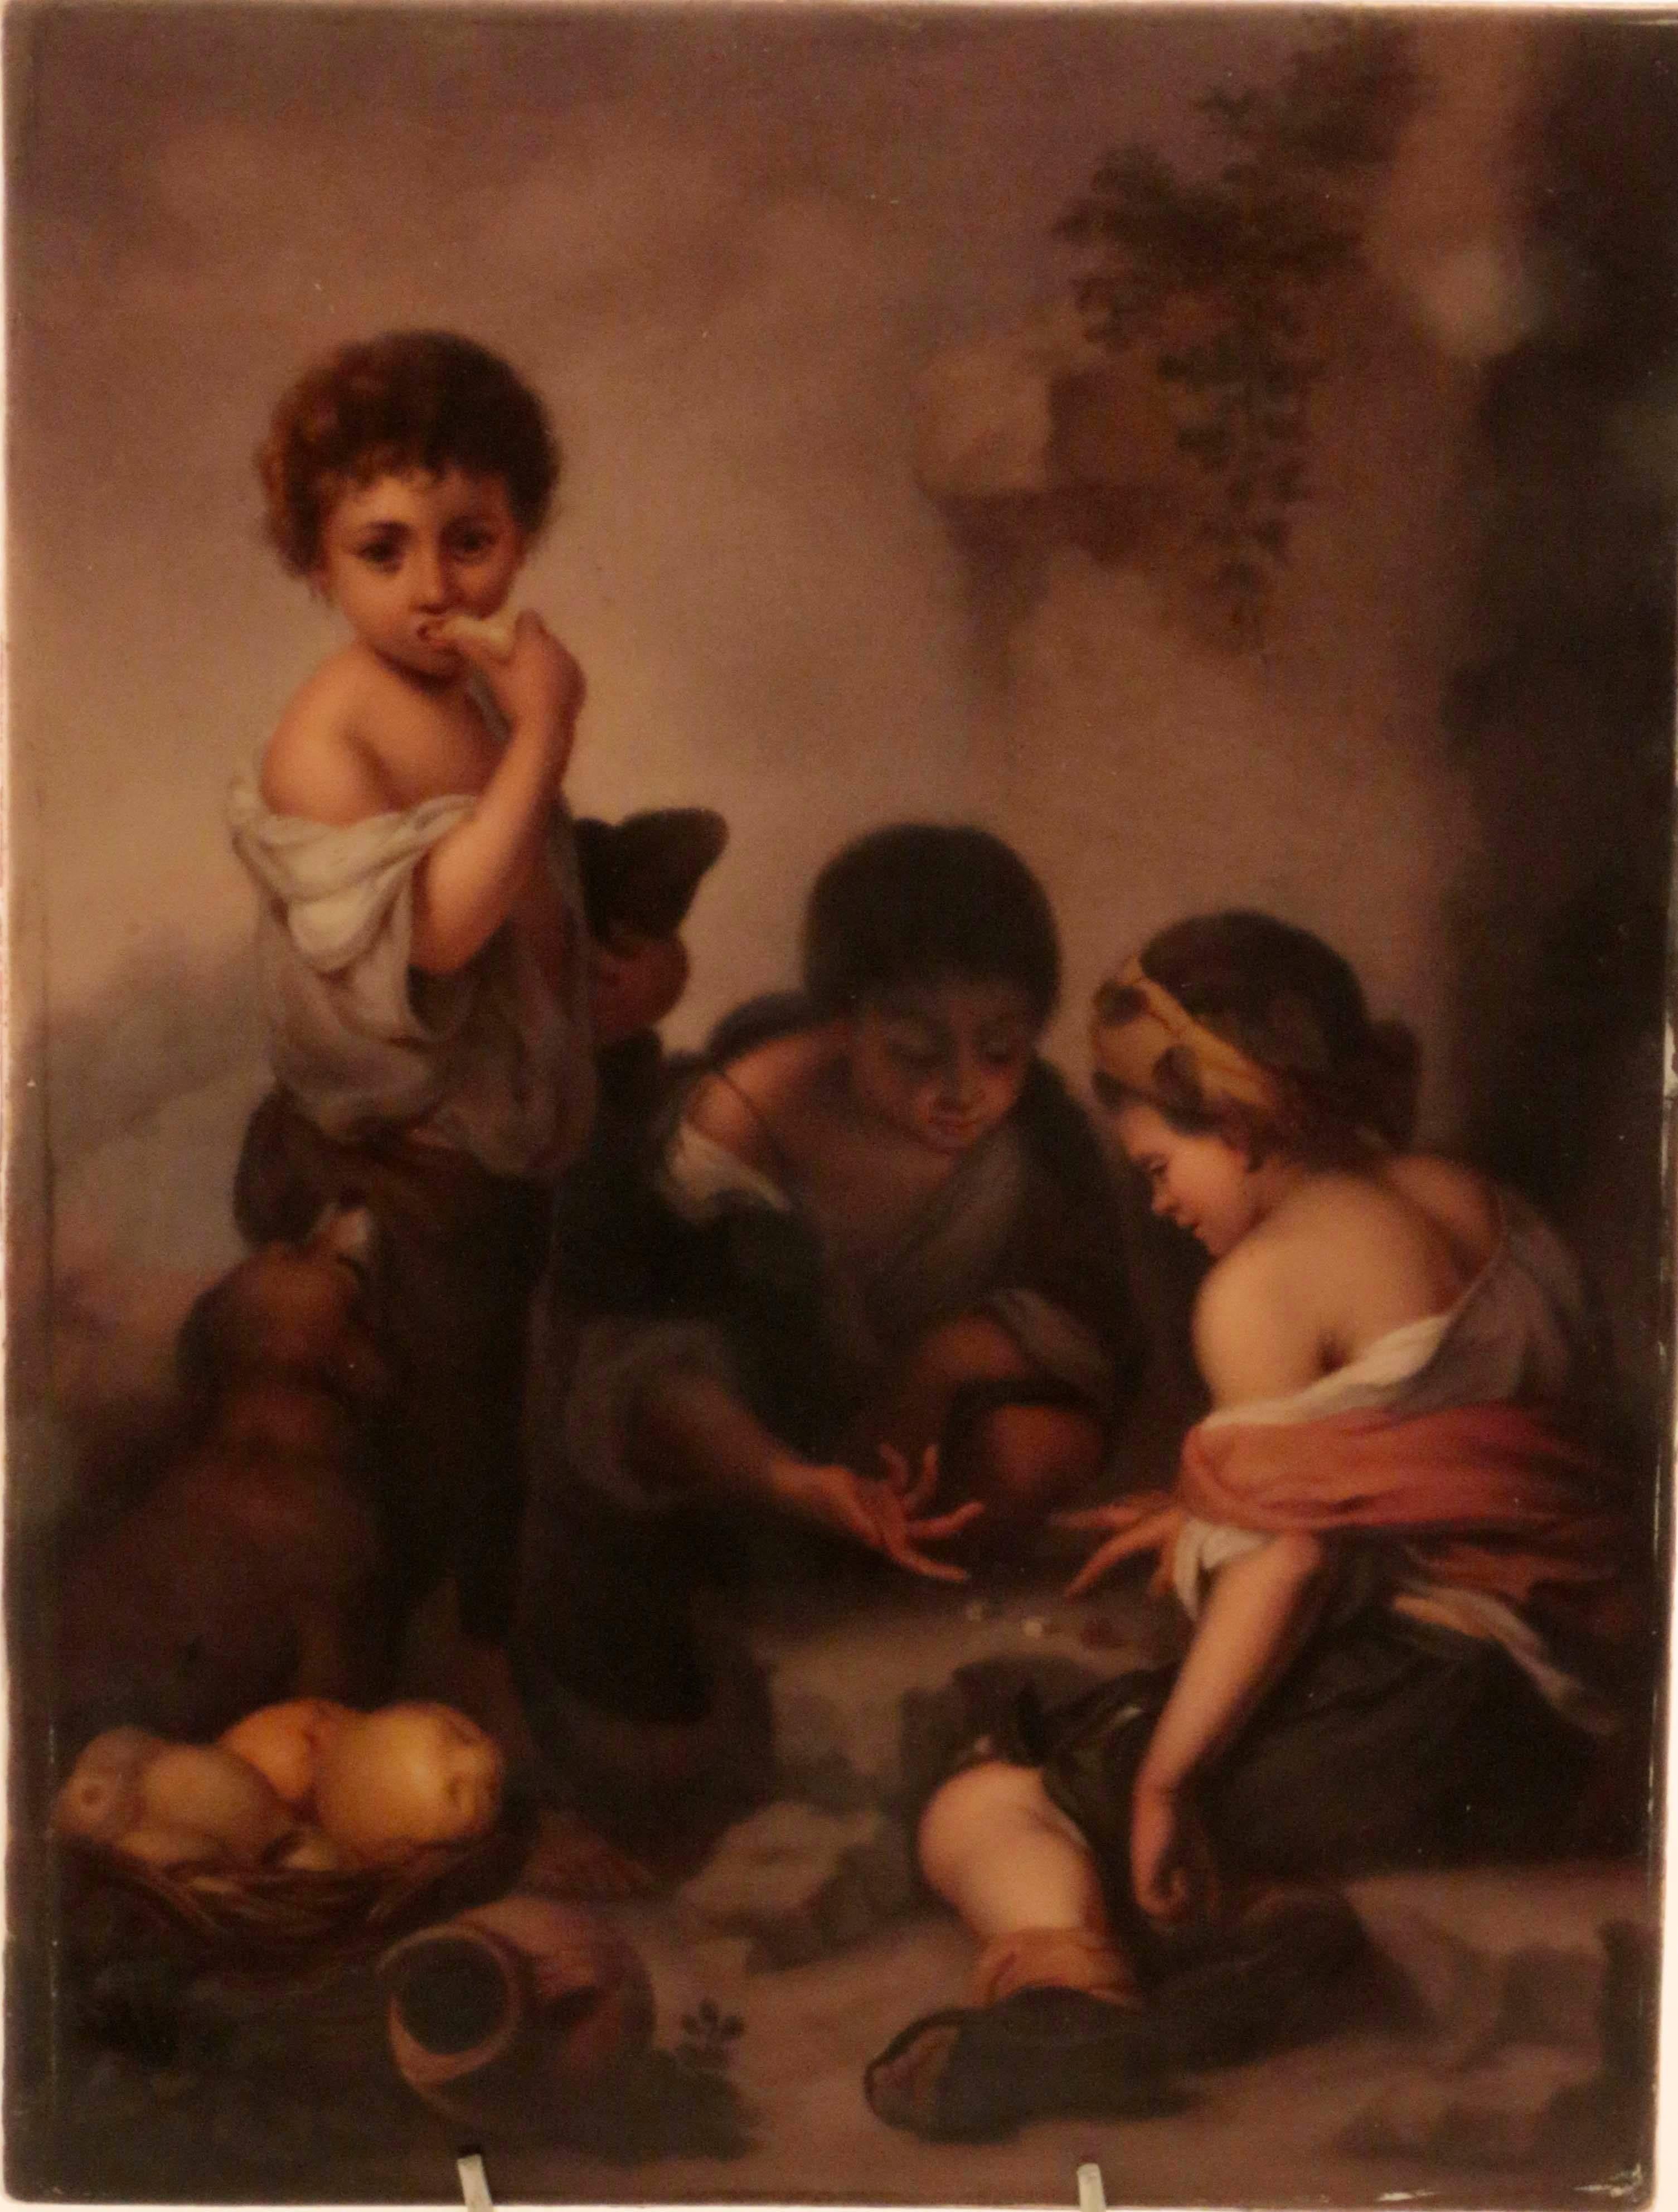 Finely painted after Bartolome Esteban Murillo (Spanish, 1617-1682), a KPM plaque, boys playing dice, with scepter mark verso and impressed H
There is also partially illegible writing verso including a date26/12/ 57 and perhaps, Mr Baxter. This